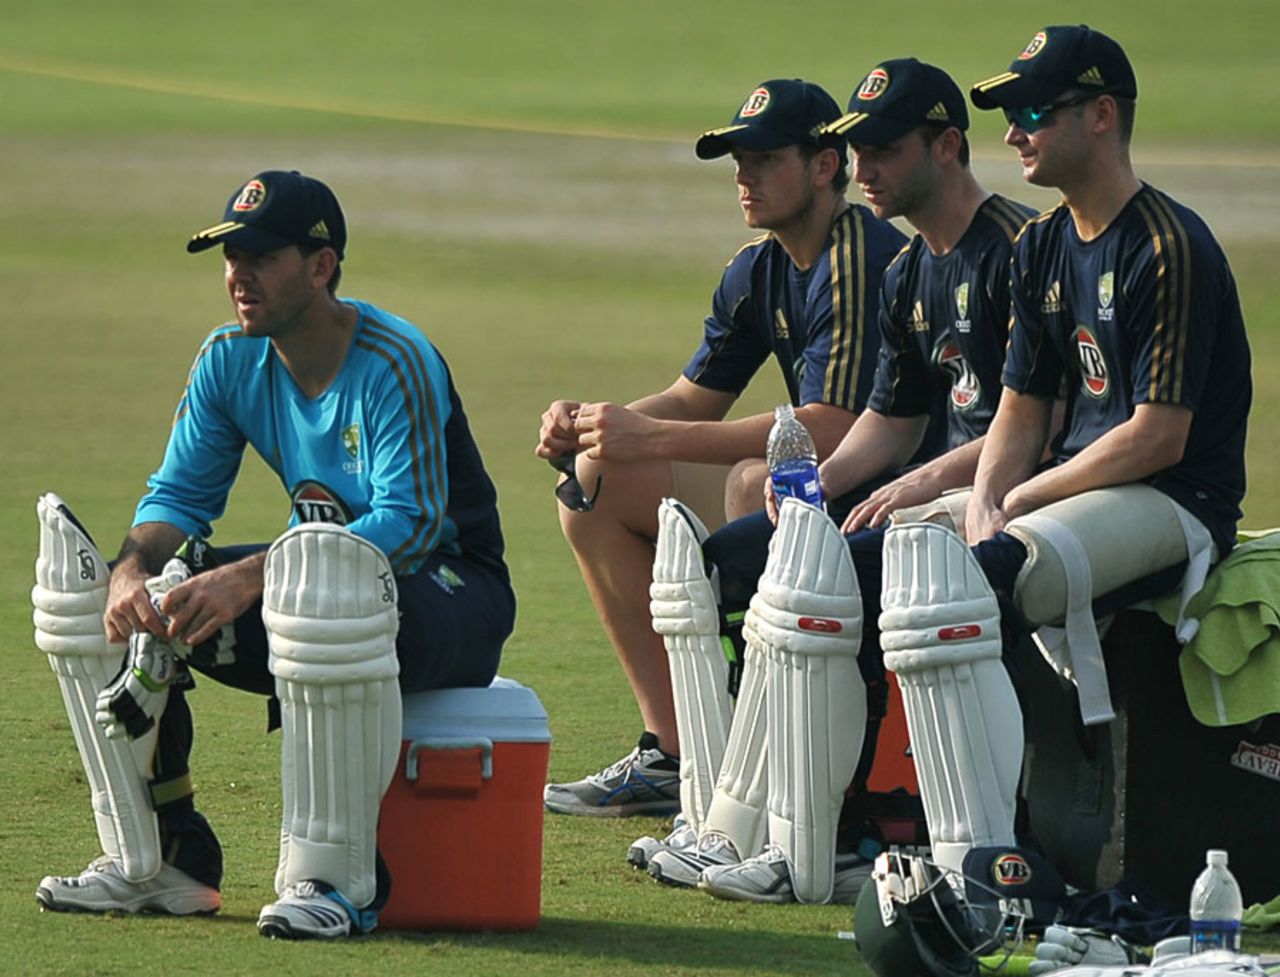 Ricky Ponting, Michael Clarke, Phillip Hughes and Peter George rest during practice, Chandigarh, September 24, 2010